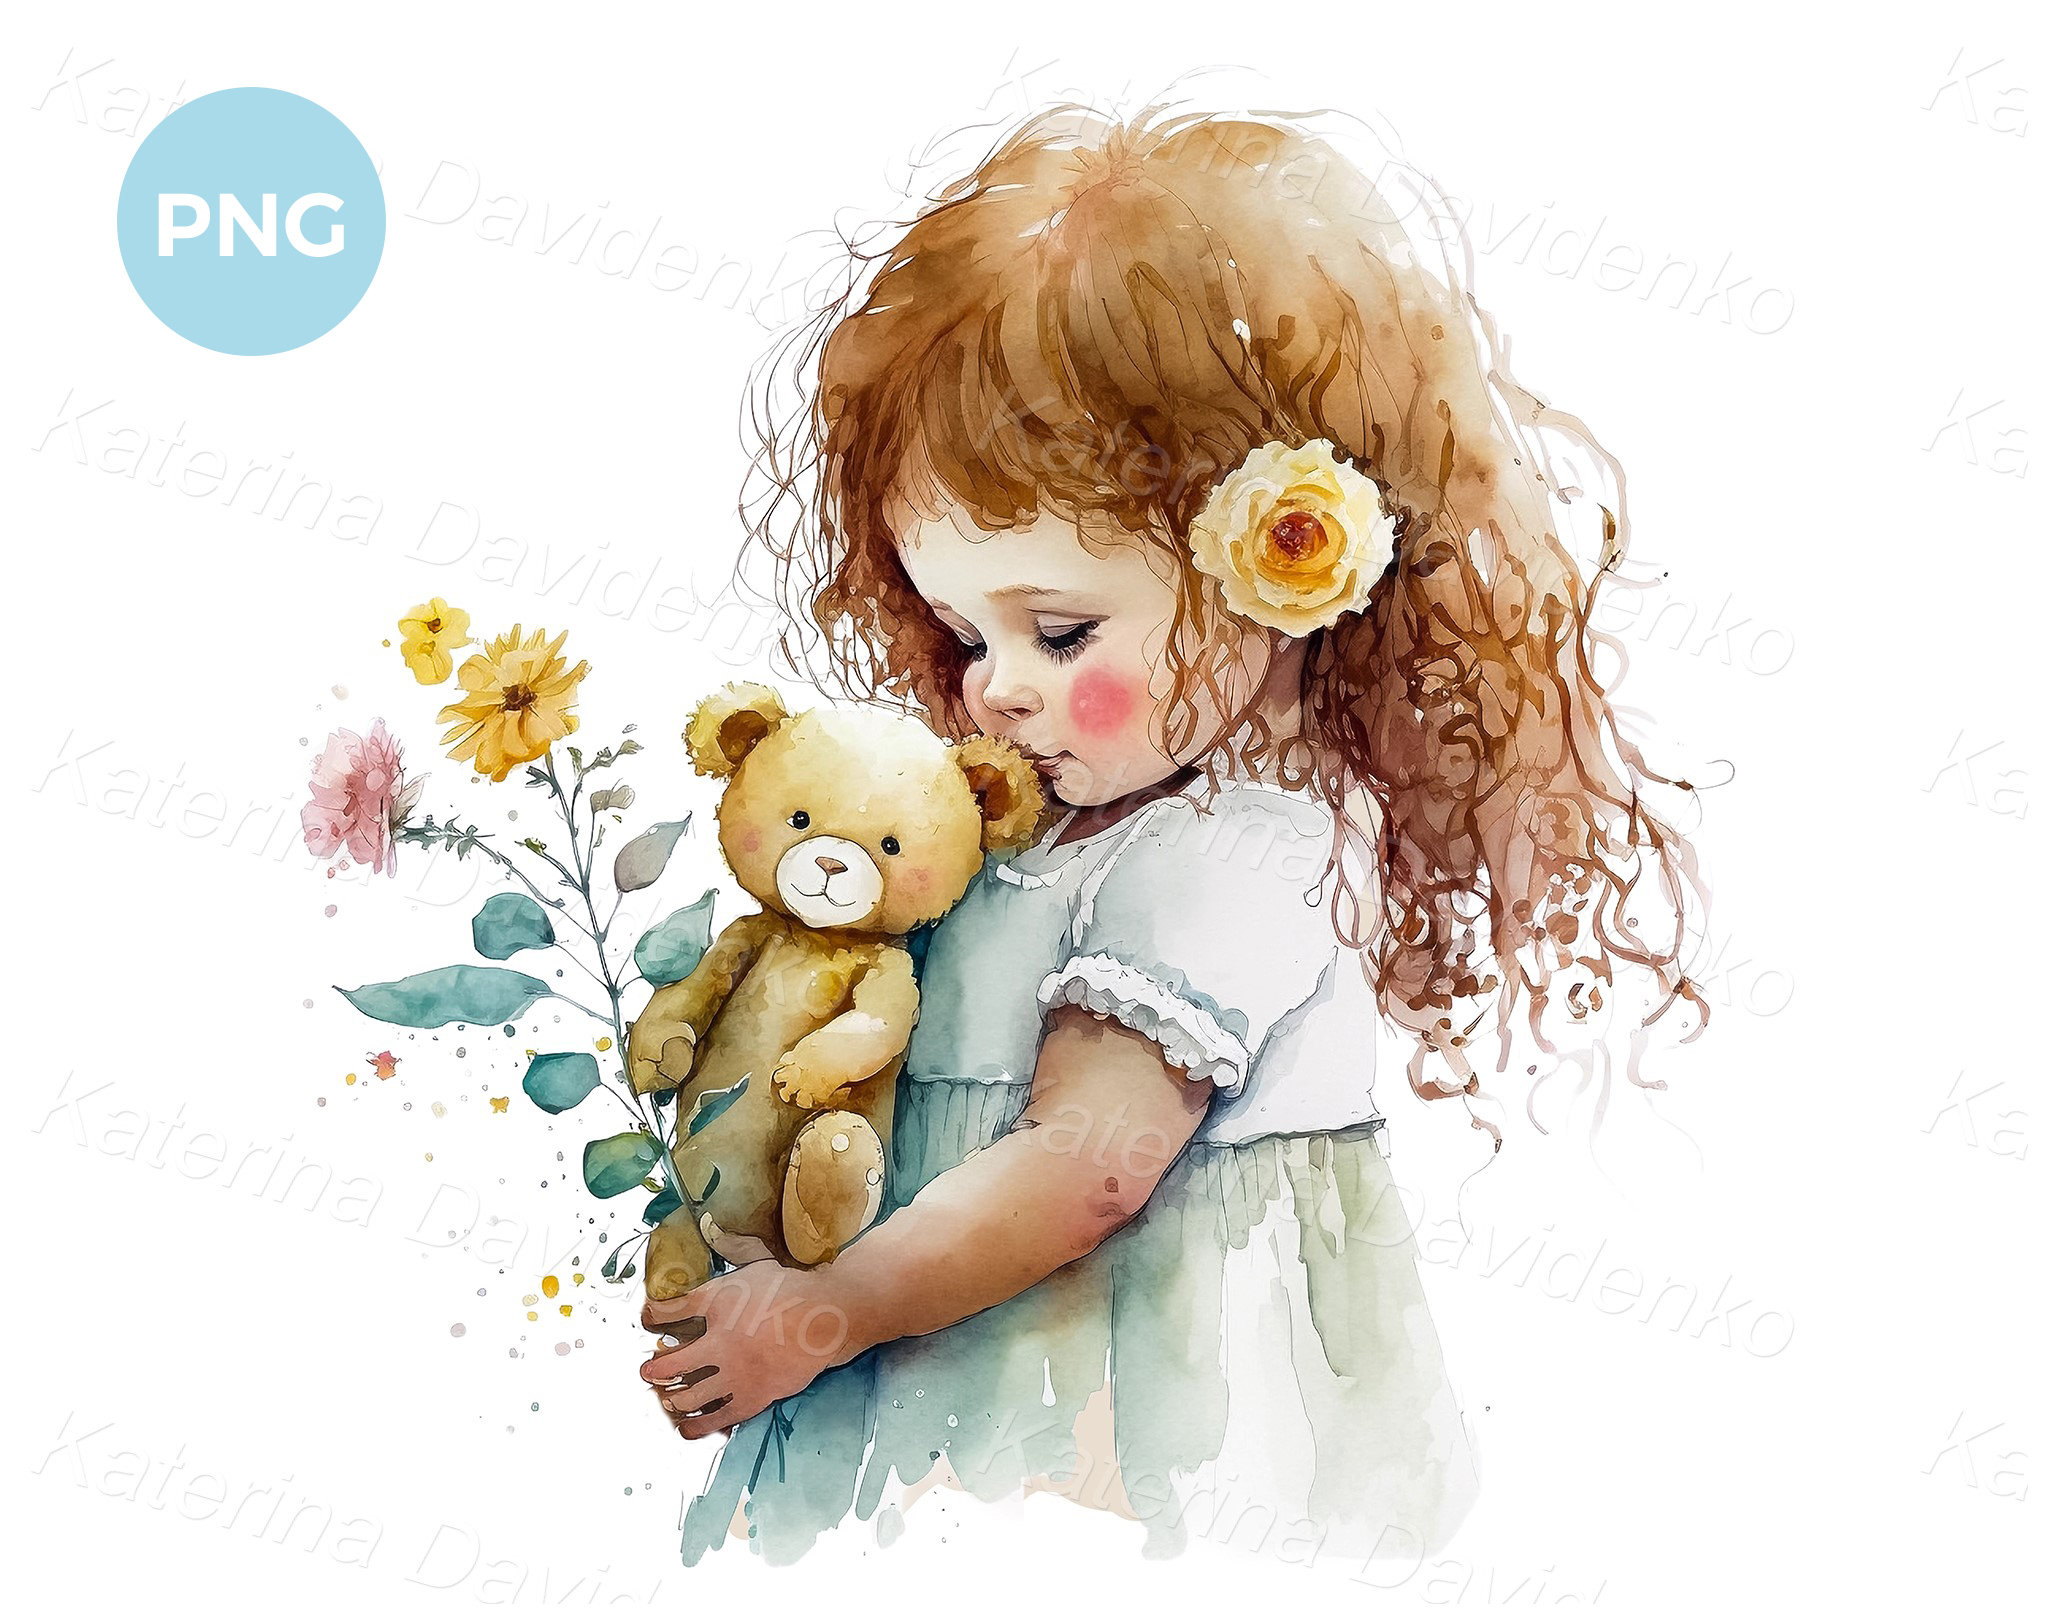 How Draw Cute Teddy Bear Easy: Over 201 Royalty-Free Licensable Stock  Illustrations & Drawings | Shutterstock